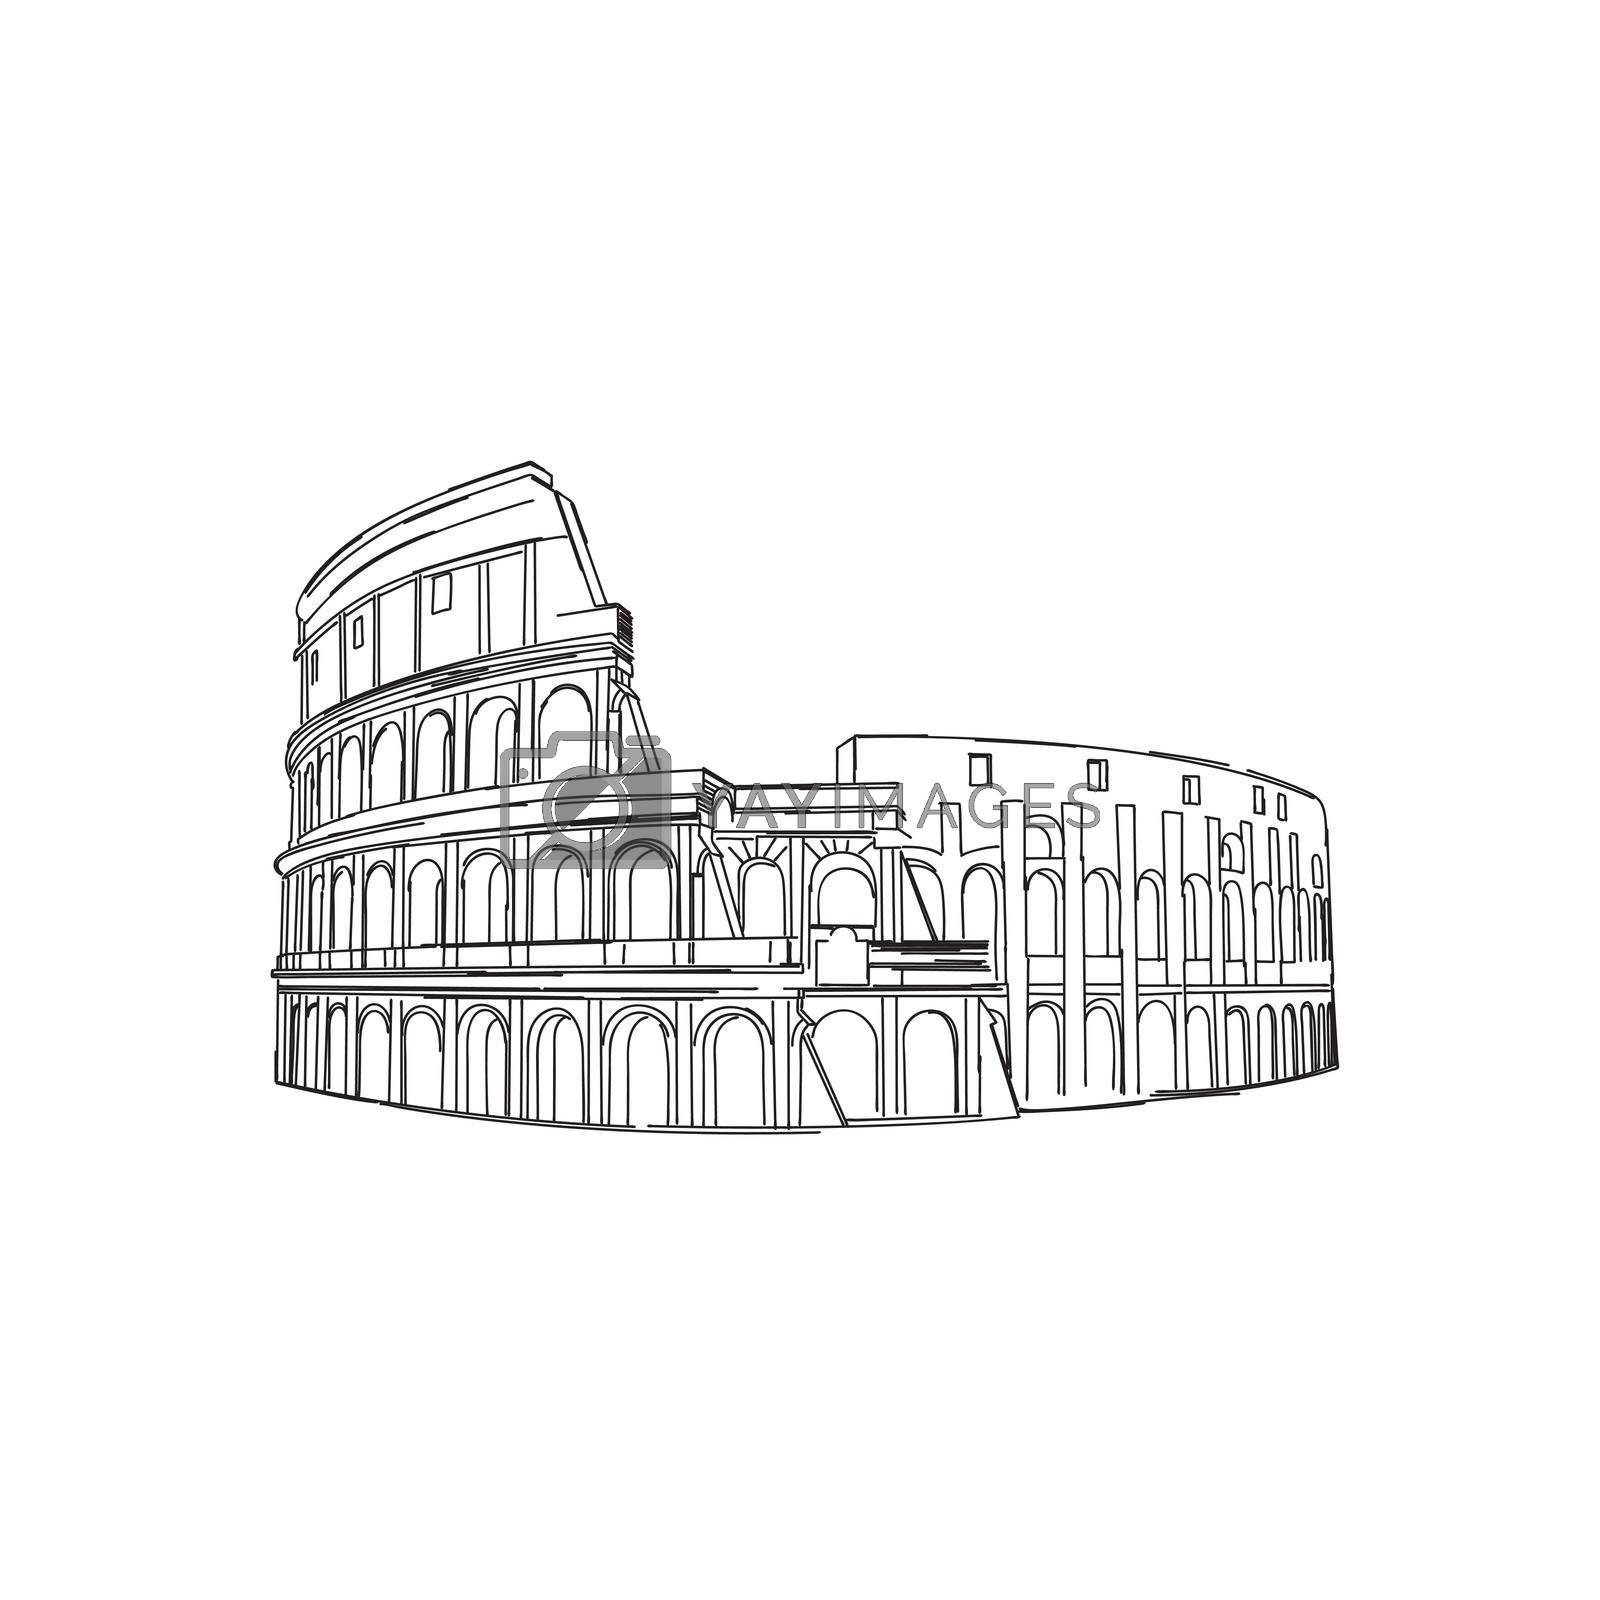 Royalty free image of Colosseum vector by Lirch